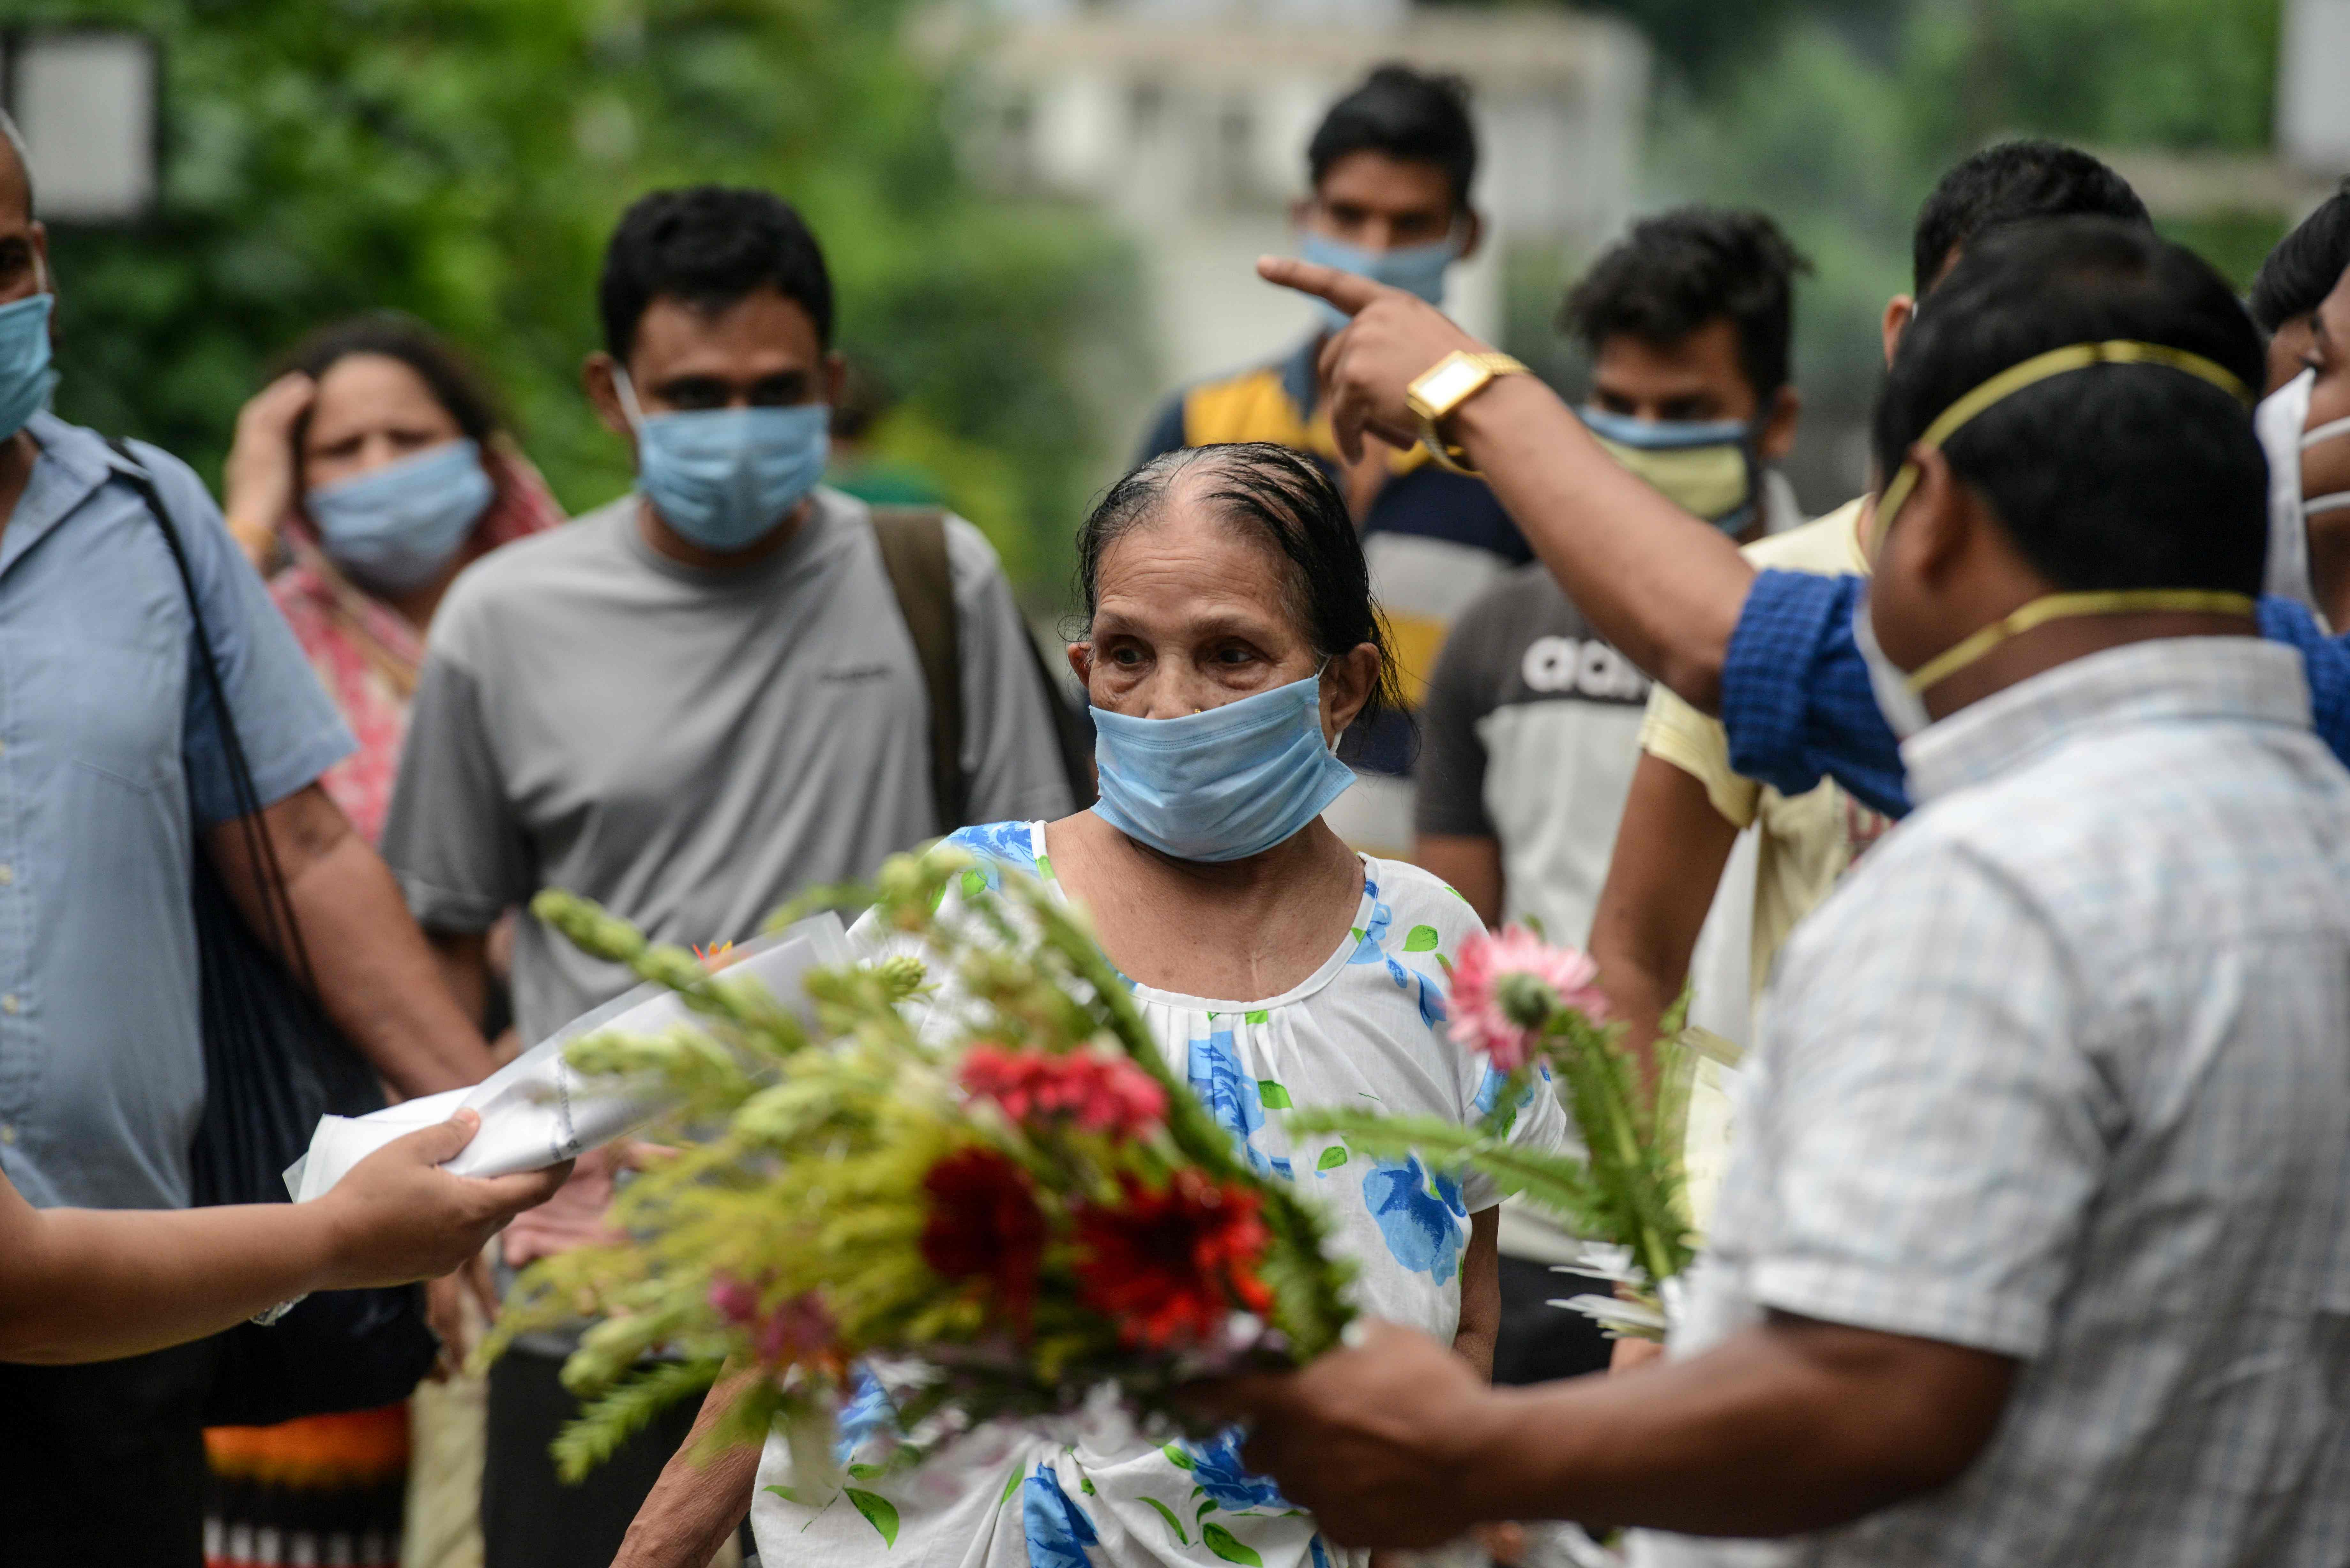 Medical staff hands over certificates and flowers to a patient (C) recovered from the COVID-19 coronavirus after their discharge on the occasion of the Indian National Doctors' Day at a hospital in Siliguri on July 1, 2020. (Photo by AFP)